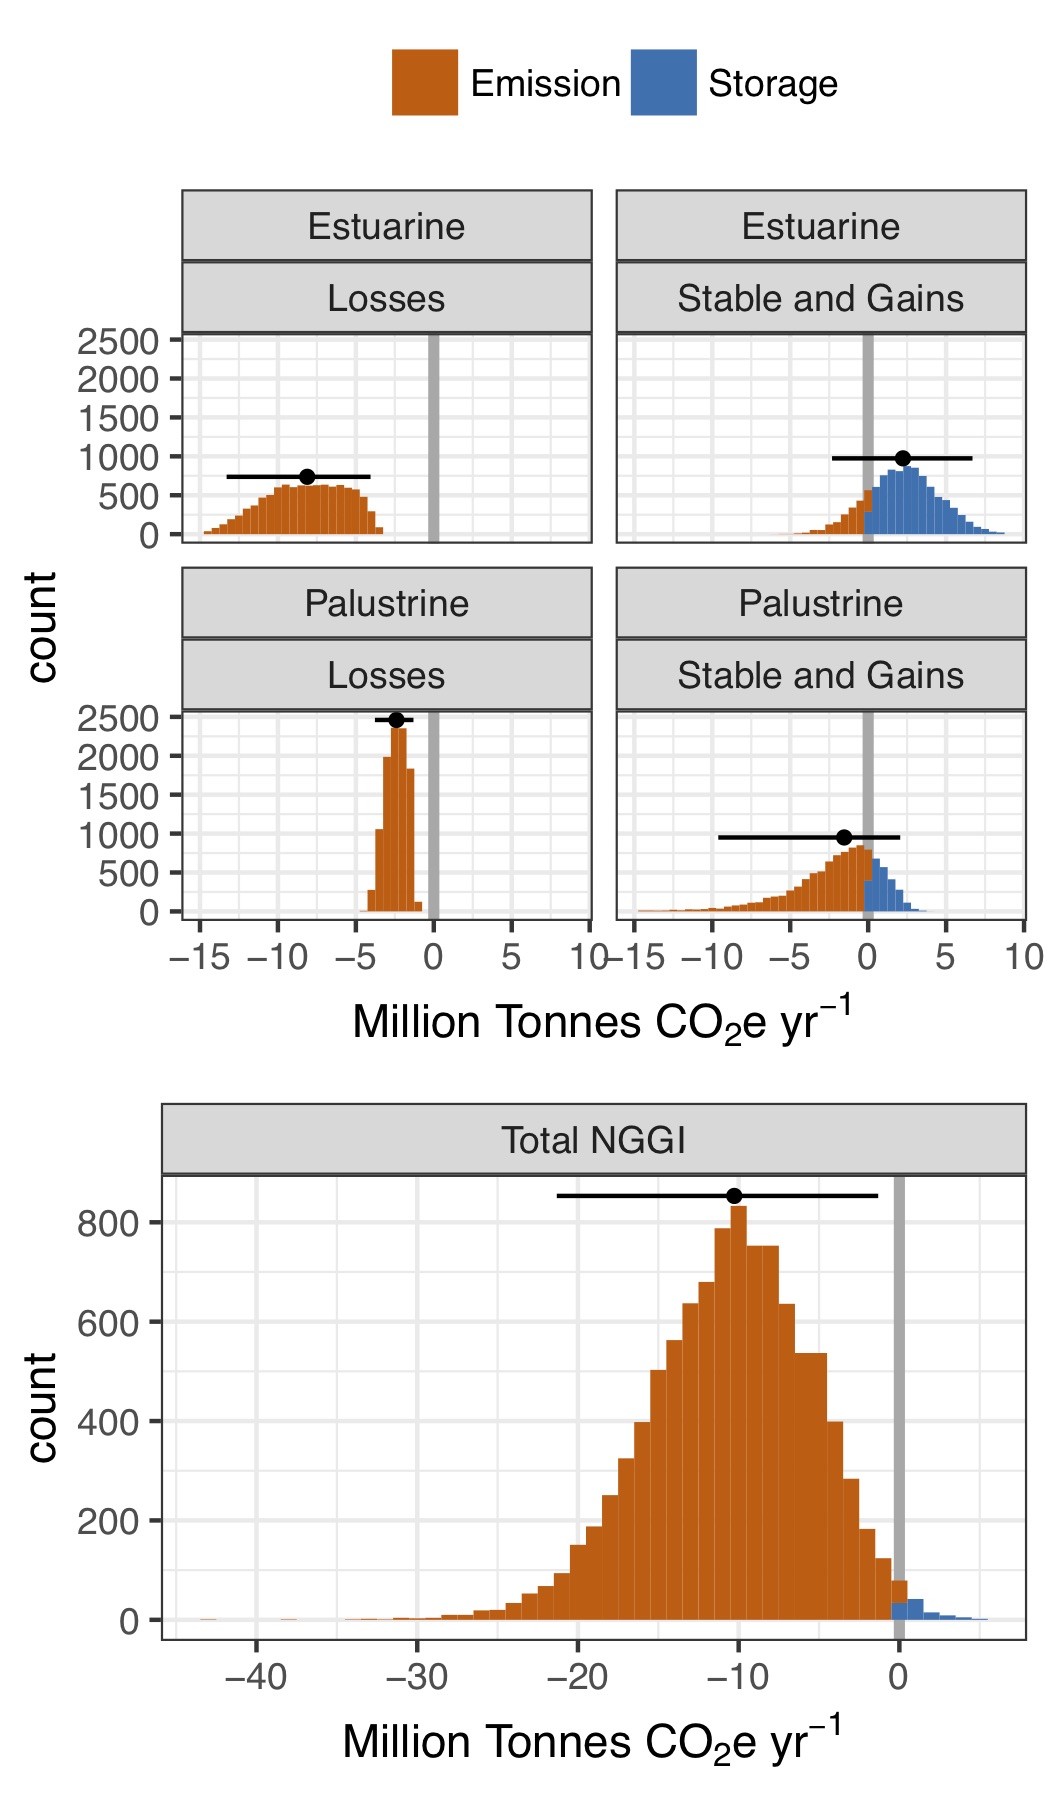 CONUS inventory results of 10,000 Monte Carlo simulations, shaded to distinguish simulations resulting in a net-emission (orange) or a net-storage (blue) scenario. The thick gray vertical line at 0 separates these scenarios. Points indicate medians, and black horizontal lines the upper and lower 95% confidence intervals. Top panels separate fluxes from estuarine and palustrine wetlands, and from wetlands that were lost from those that were stable or gained area. The bottom panel shows net-annualized emissions from 2006–2011.